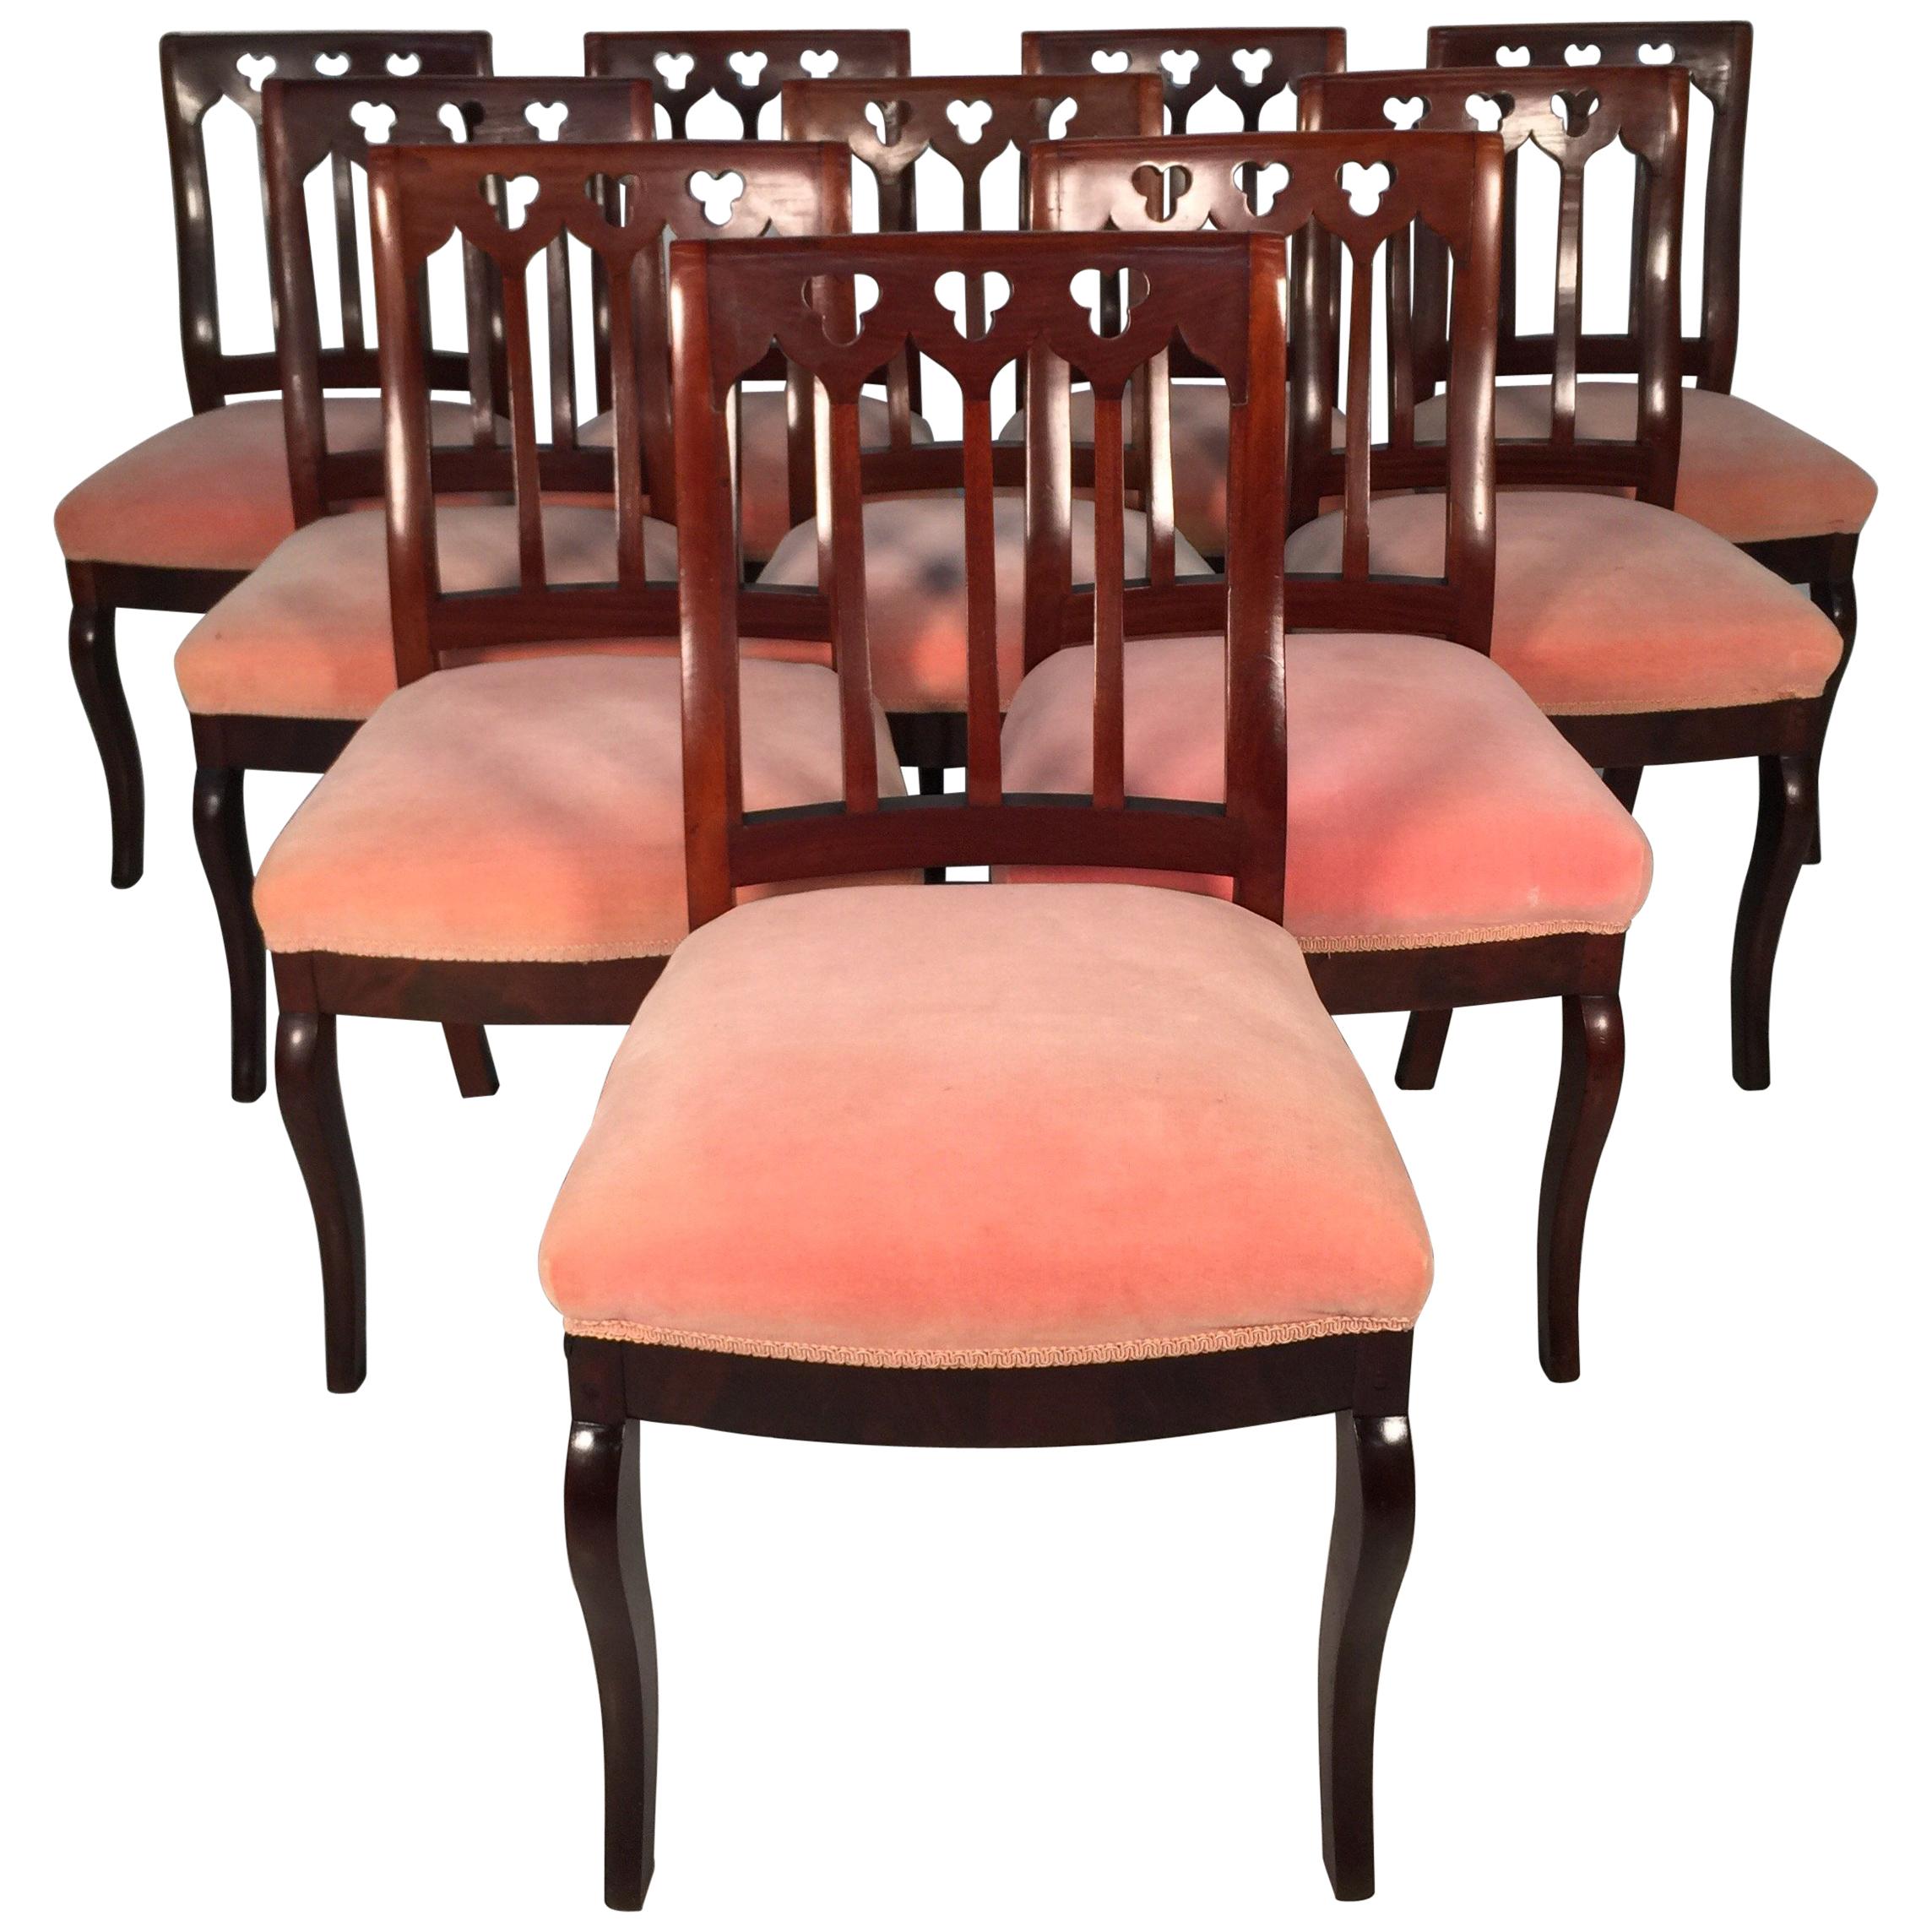 Set of 10, circa 1850s Gothic Revival Upholstered Dining Chairs, by John Jelliff